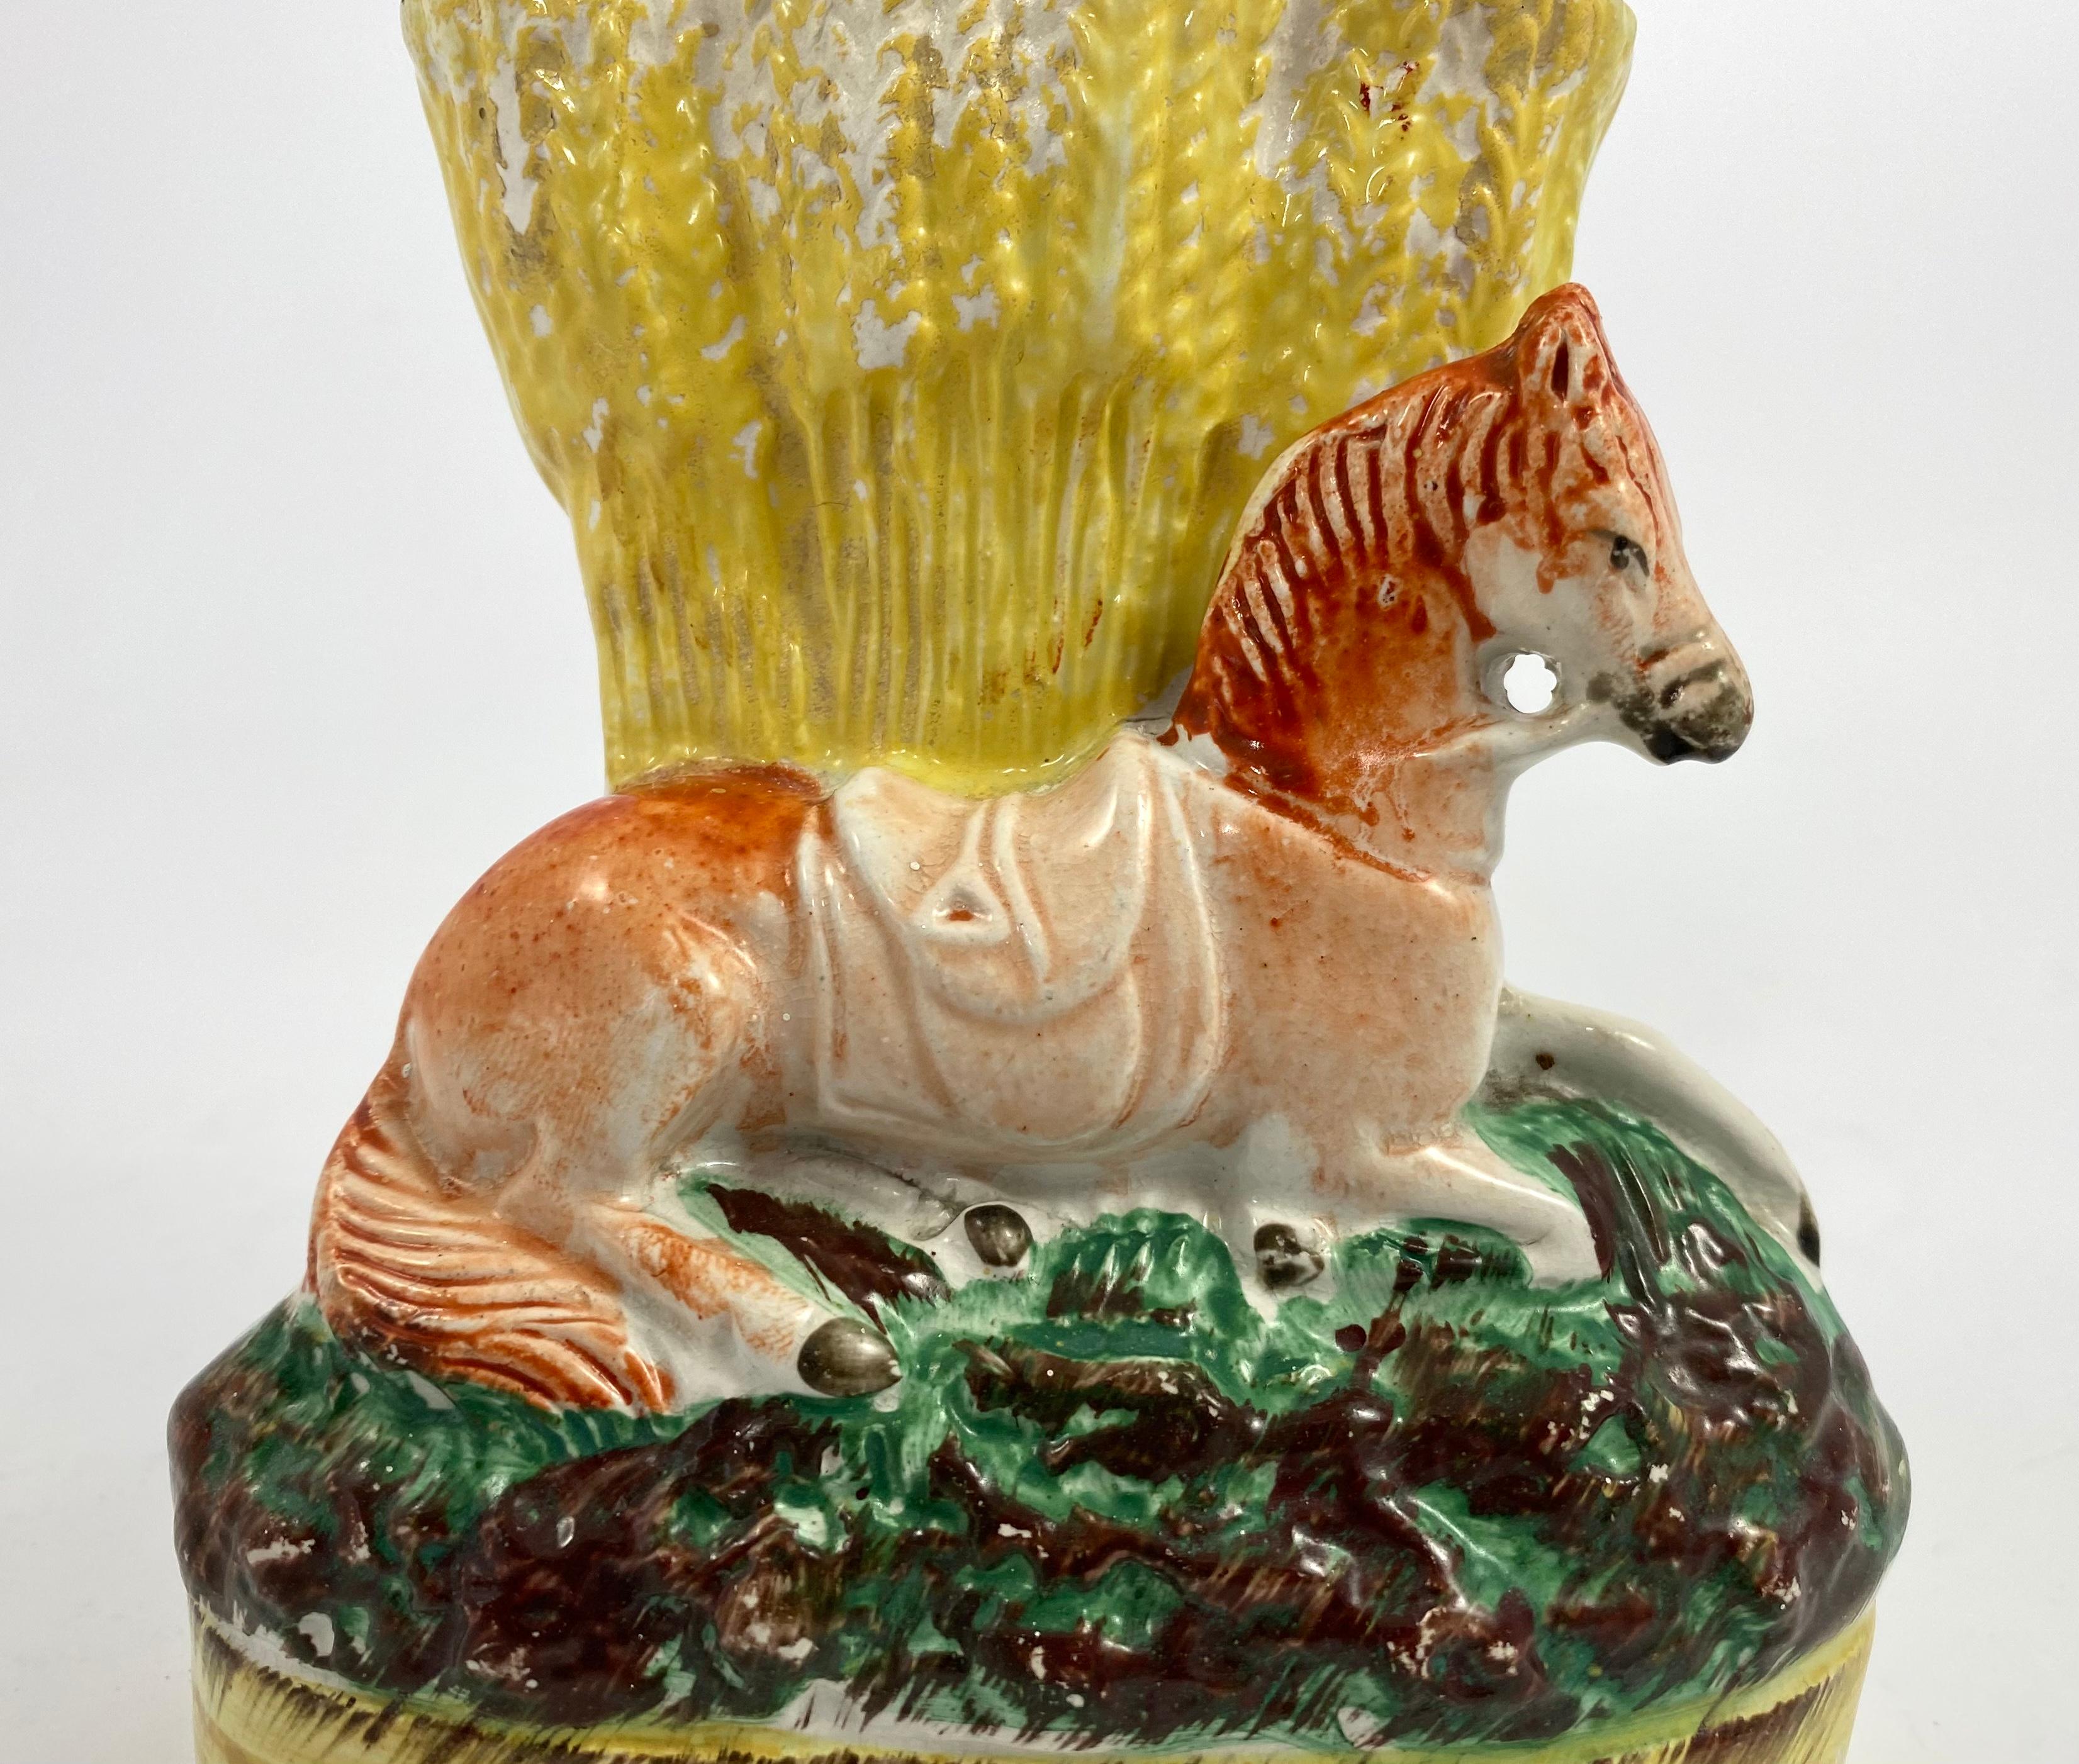 Rare Staffordshire pottery horse spill vase, c. 1860. Well modelled as a saddled horse, recumbent upon a grassy mound base, before a wheatsheaf spill vase. Painted in typical underglaze, and overglaze enamels.
Height: 14 cm, 5 1/2”.
Width: 11.5